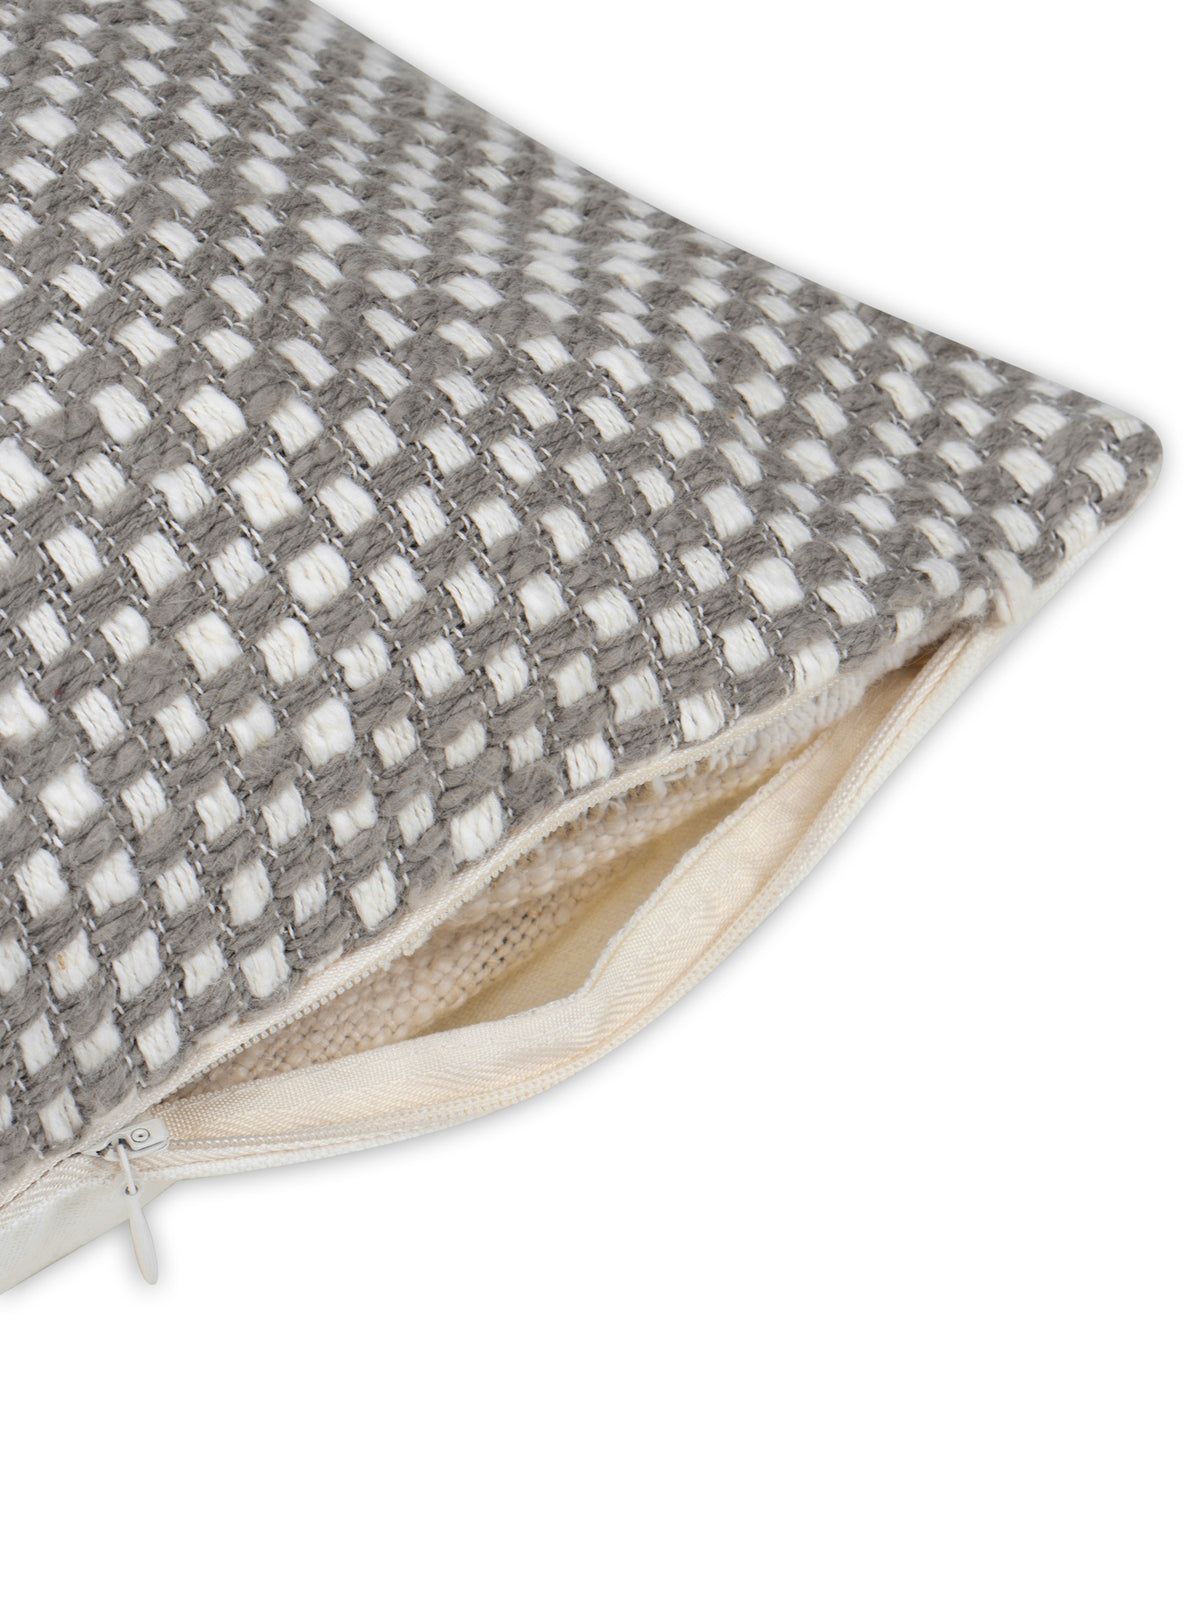 Grey cotton two tone basket weave pattern cushion cover